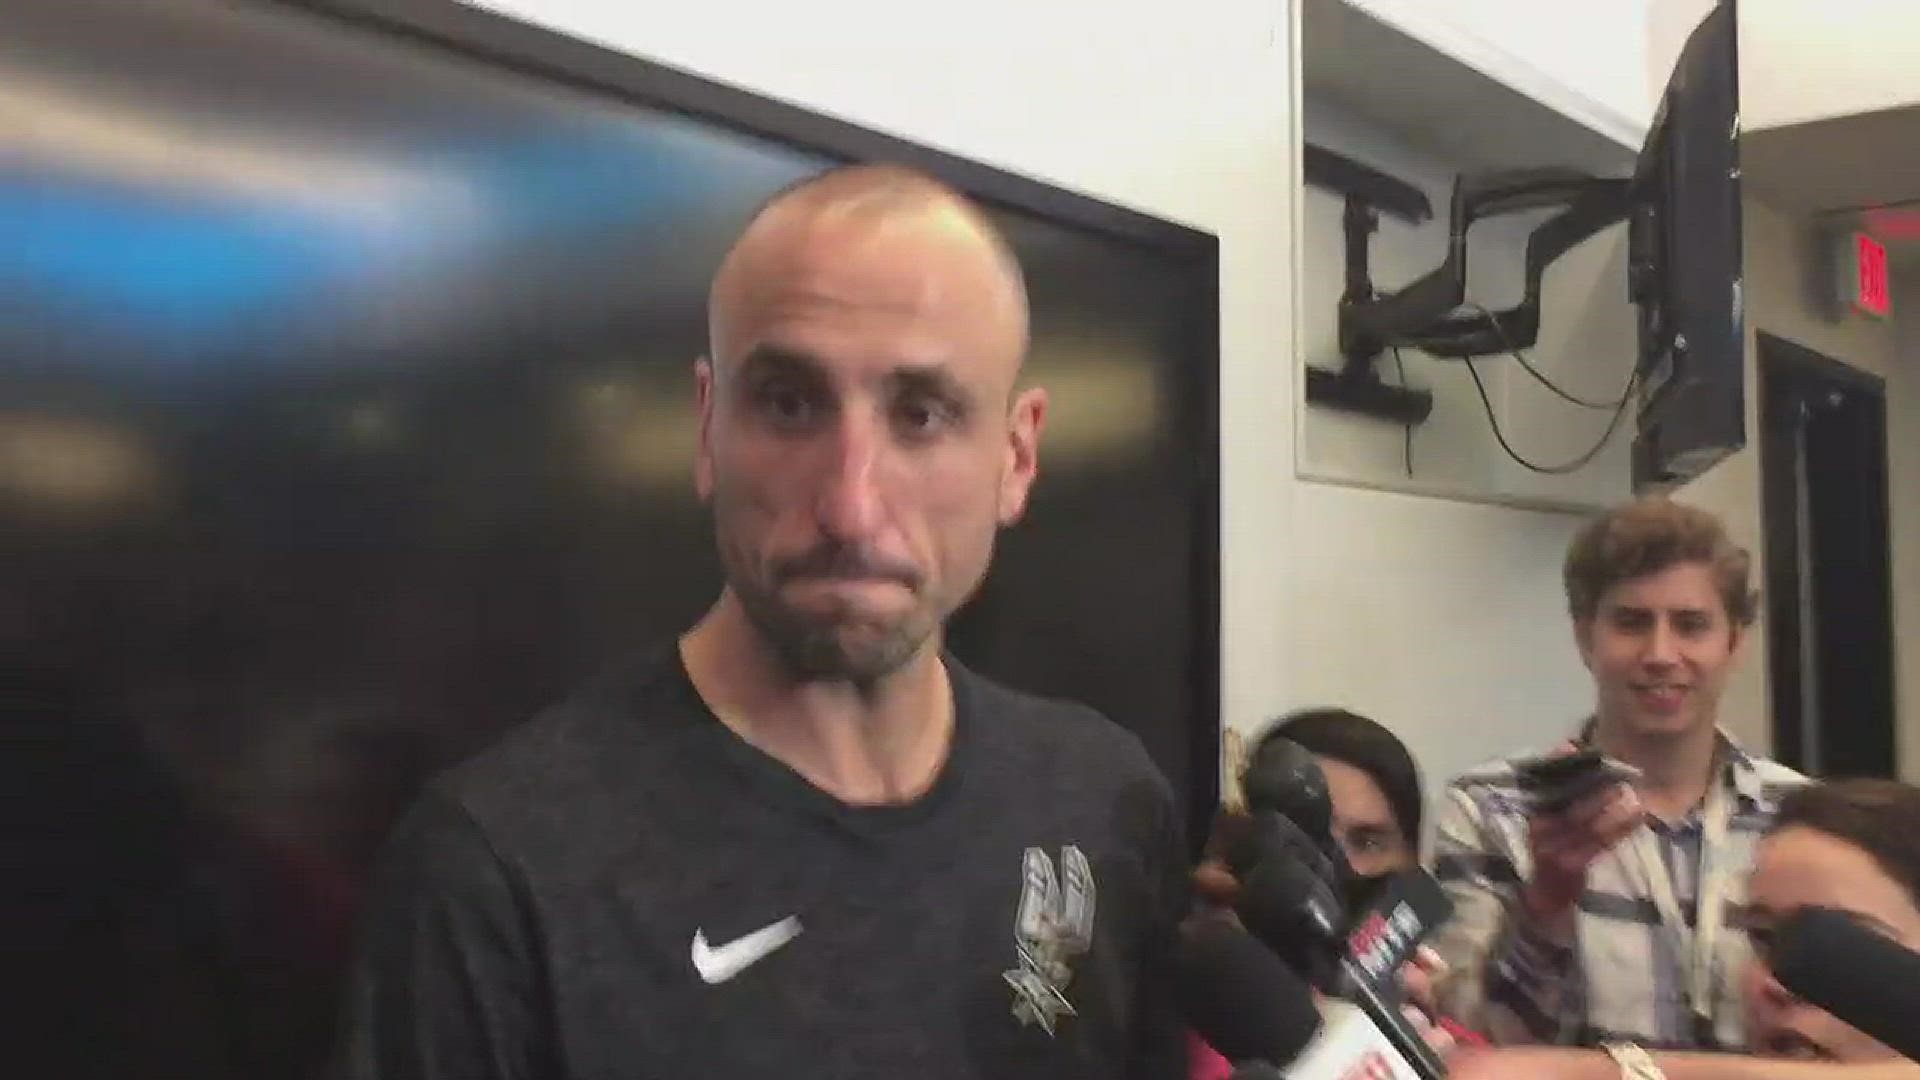 Manu talks about the win over the Timberwolves on Saturday night